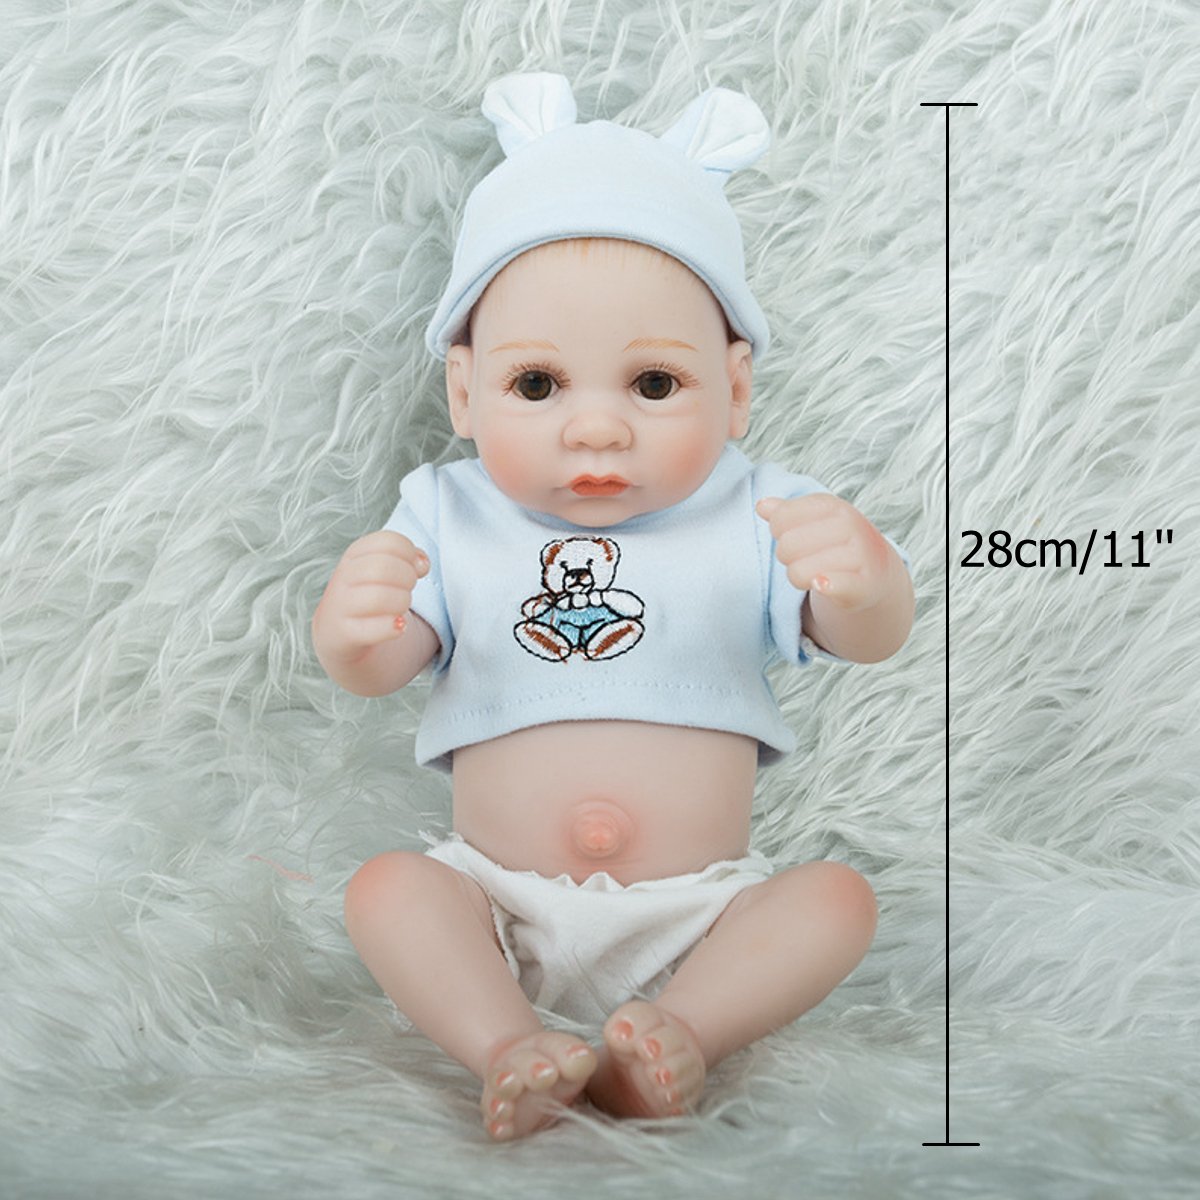 28CM-Silicone-Realistic-Sleeping-Reborns-Lifelike-Newborn-Baby-Doll-Toy-with-Moveable-Head-Arms-And--1817558-11